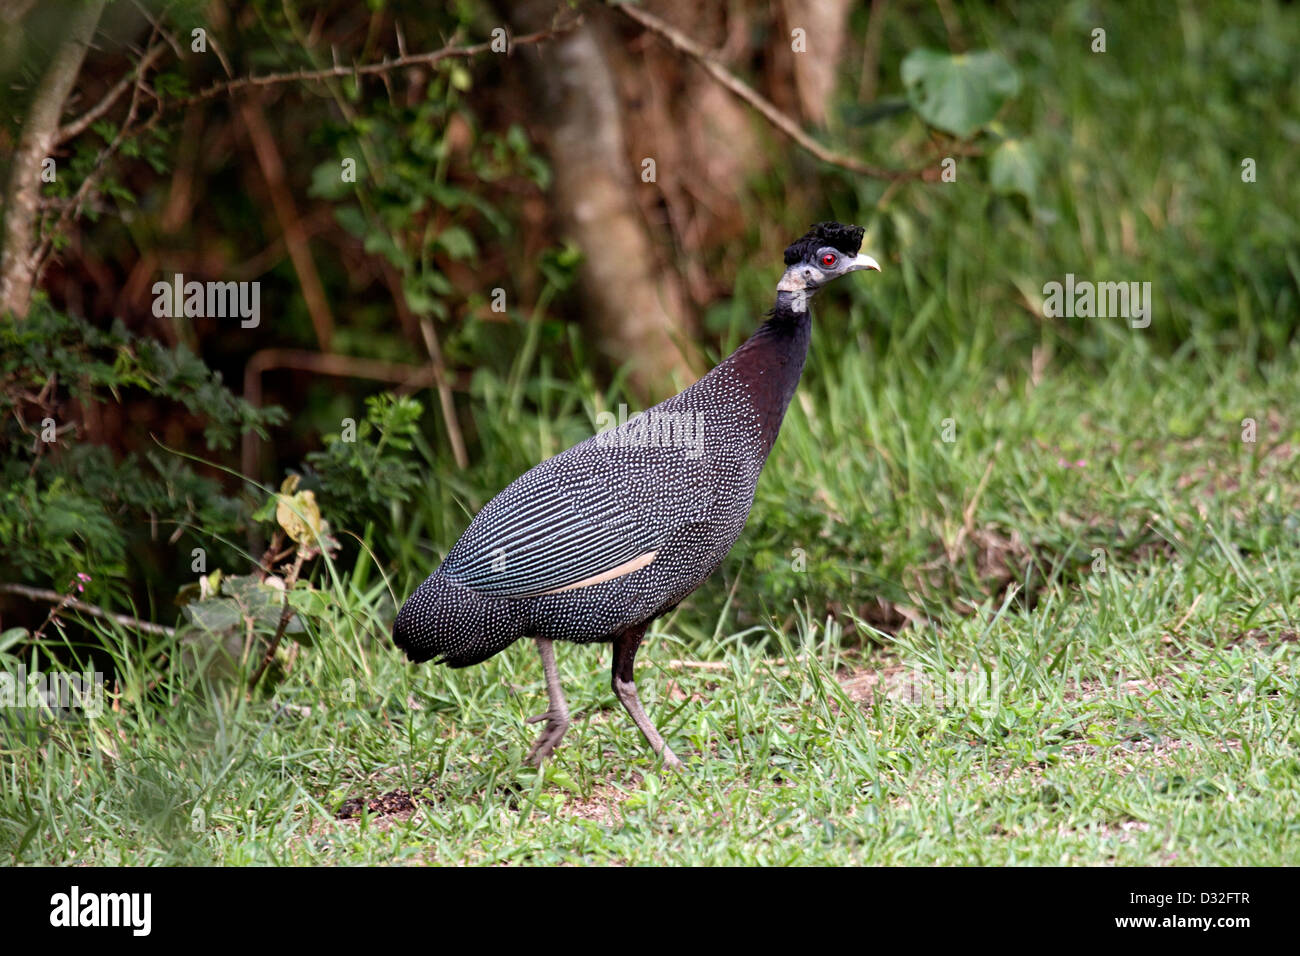 Crested guineafowl in South Africa Stock Photo